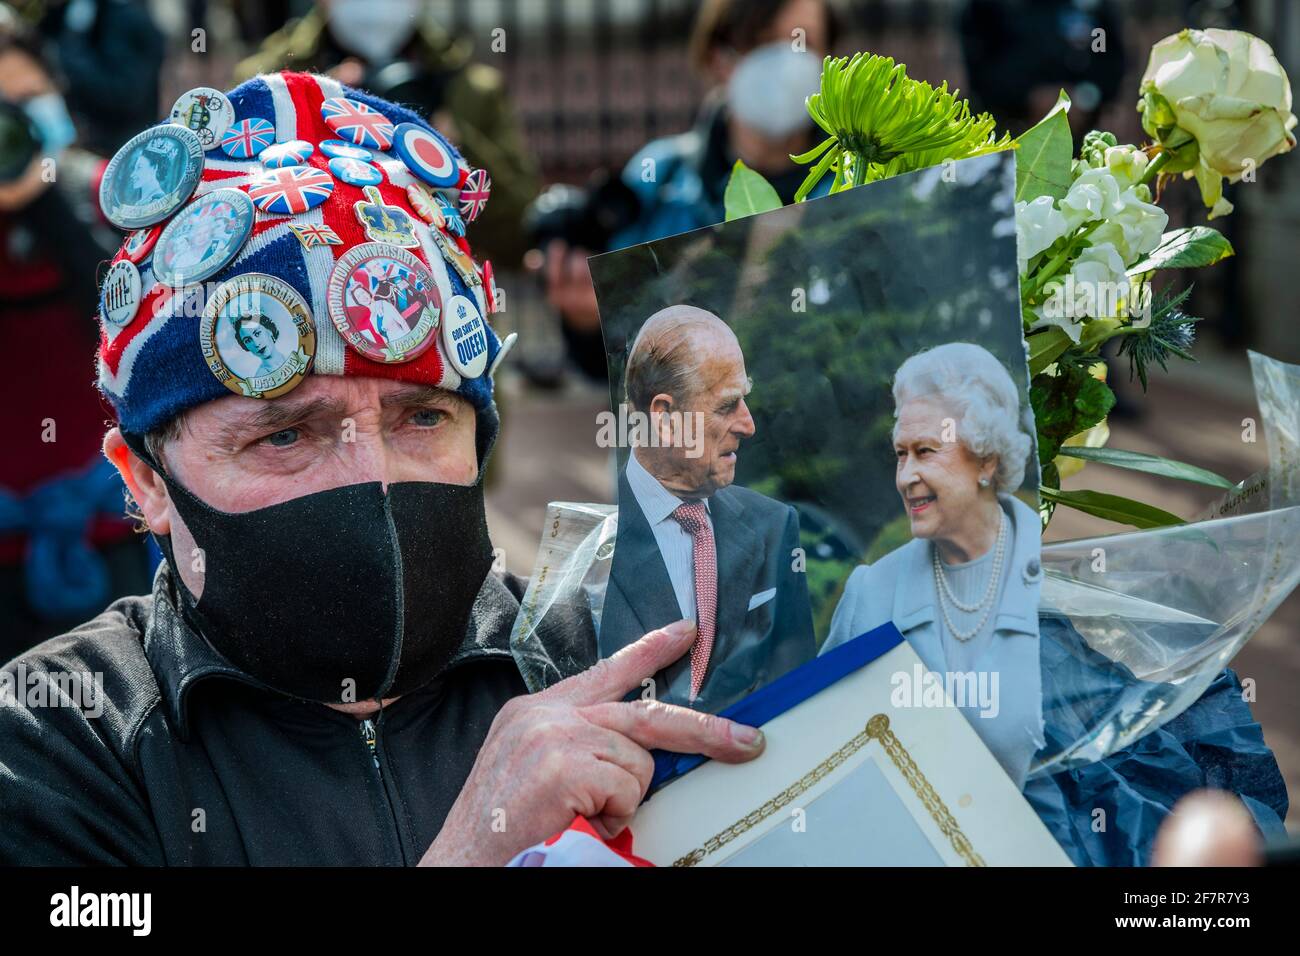 London, UK. 9th Apr, 2021. A royal fan expresses his grief and says he is now heading to Windsor Castle - as Prince Philip dies at 99. Credit: Guy Bell/Alamy Live News Stock Photo